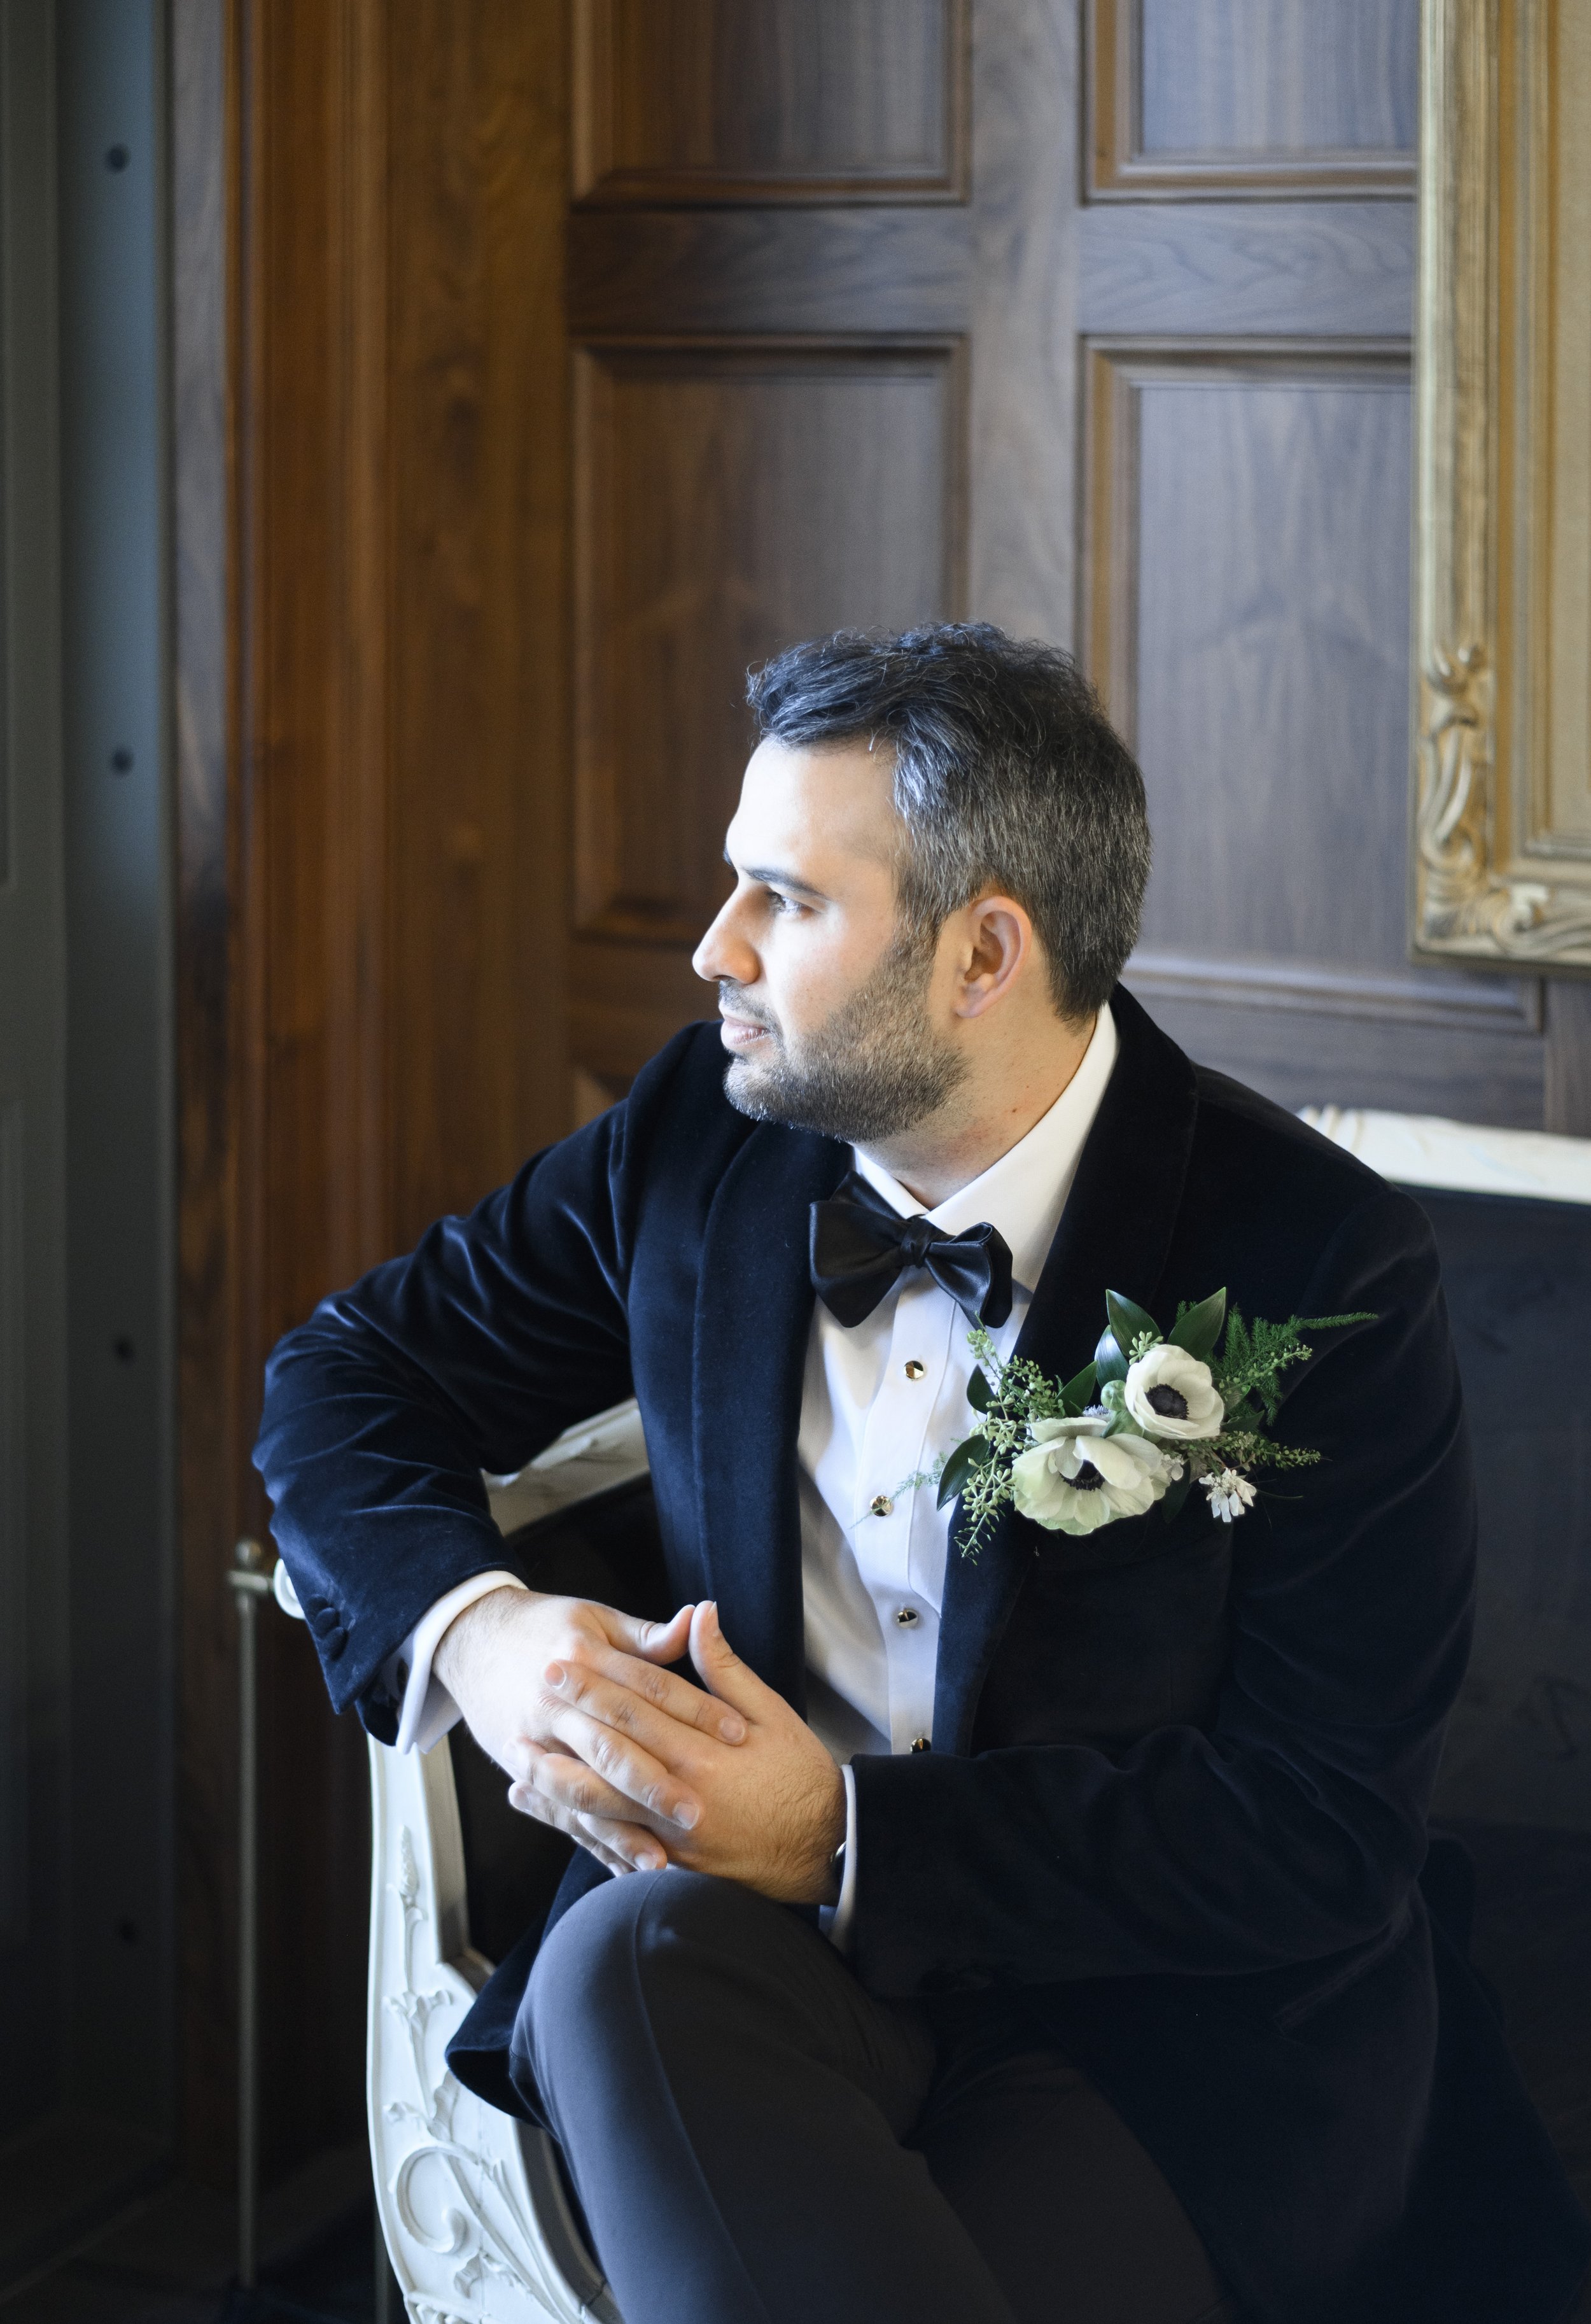  A groom portrait captured with him in deep thought on his wedding day by Savanna Richardson Photography. black suit bowtie #SavannaRichardsonPhotography #SavannaRichardsonWeddings #NYEwedding #magicalwedding #snowywedding #holidaywedding #married 